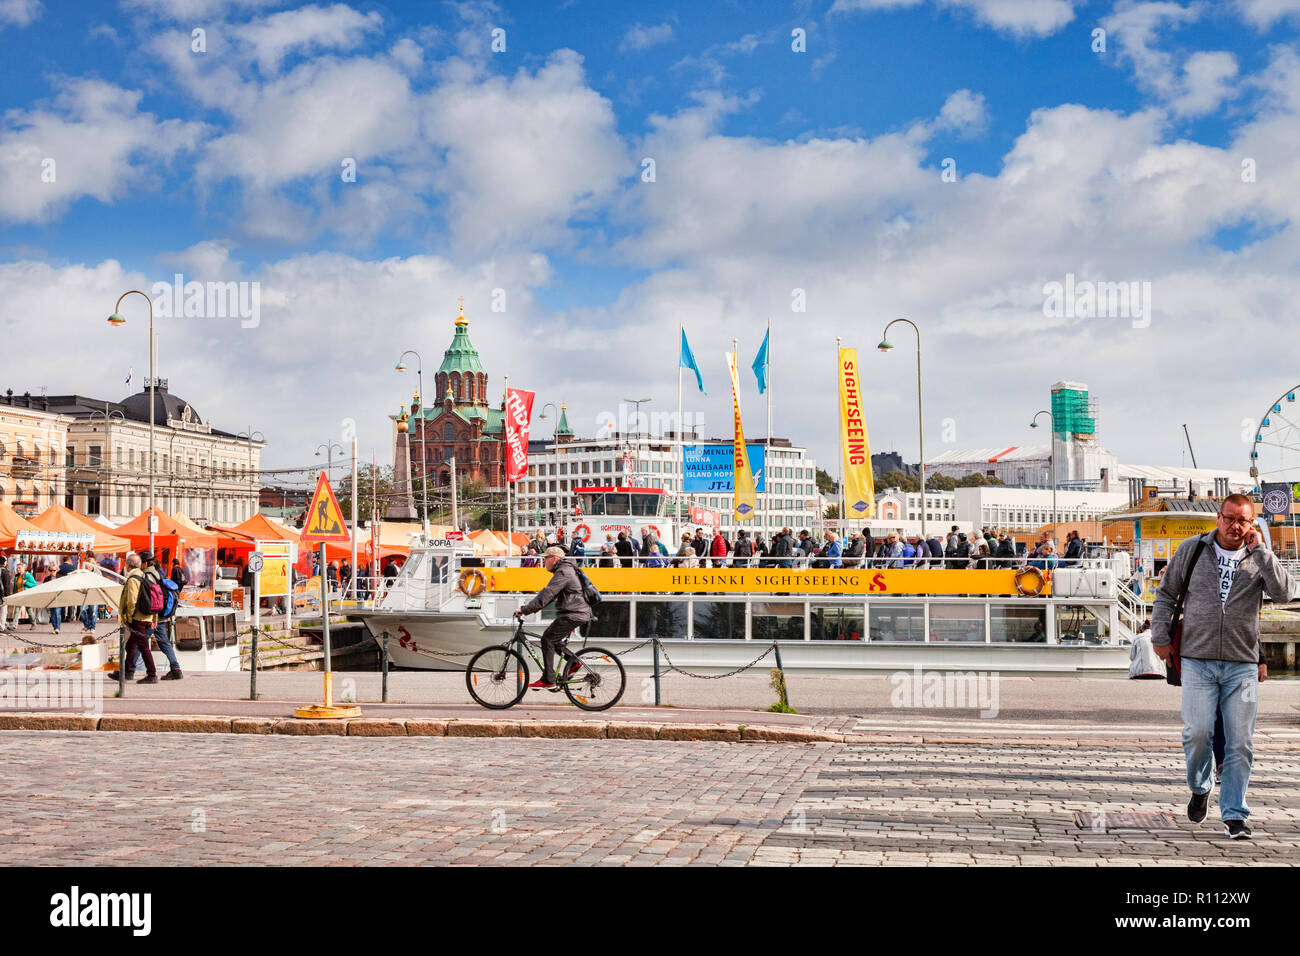 20 September 2018: Helsinki, Finland - The Helsinki waterfront, with crowds of tourists and a sightseeing boat. Stock Photo